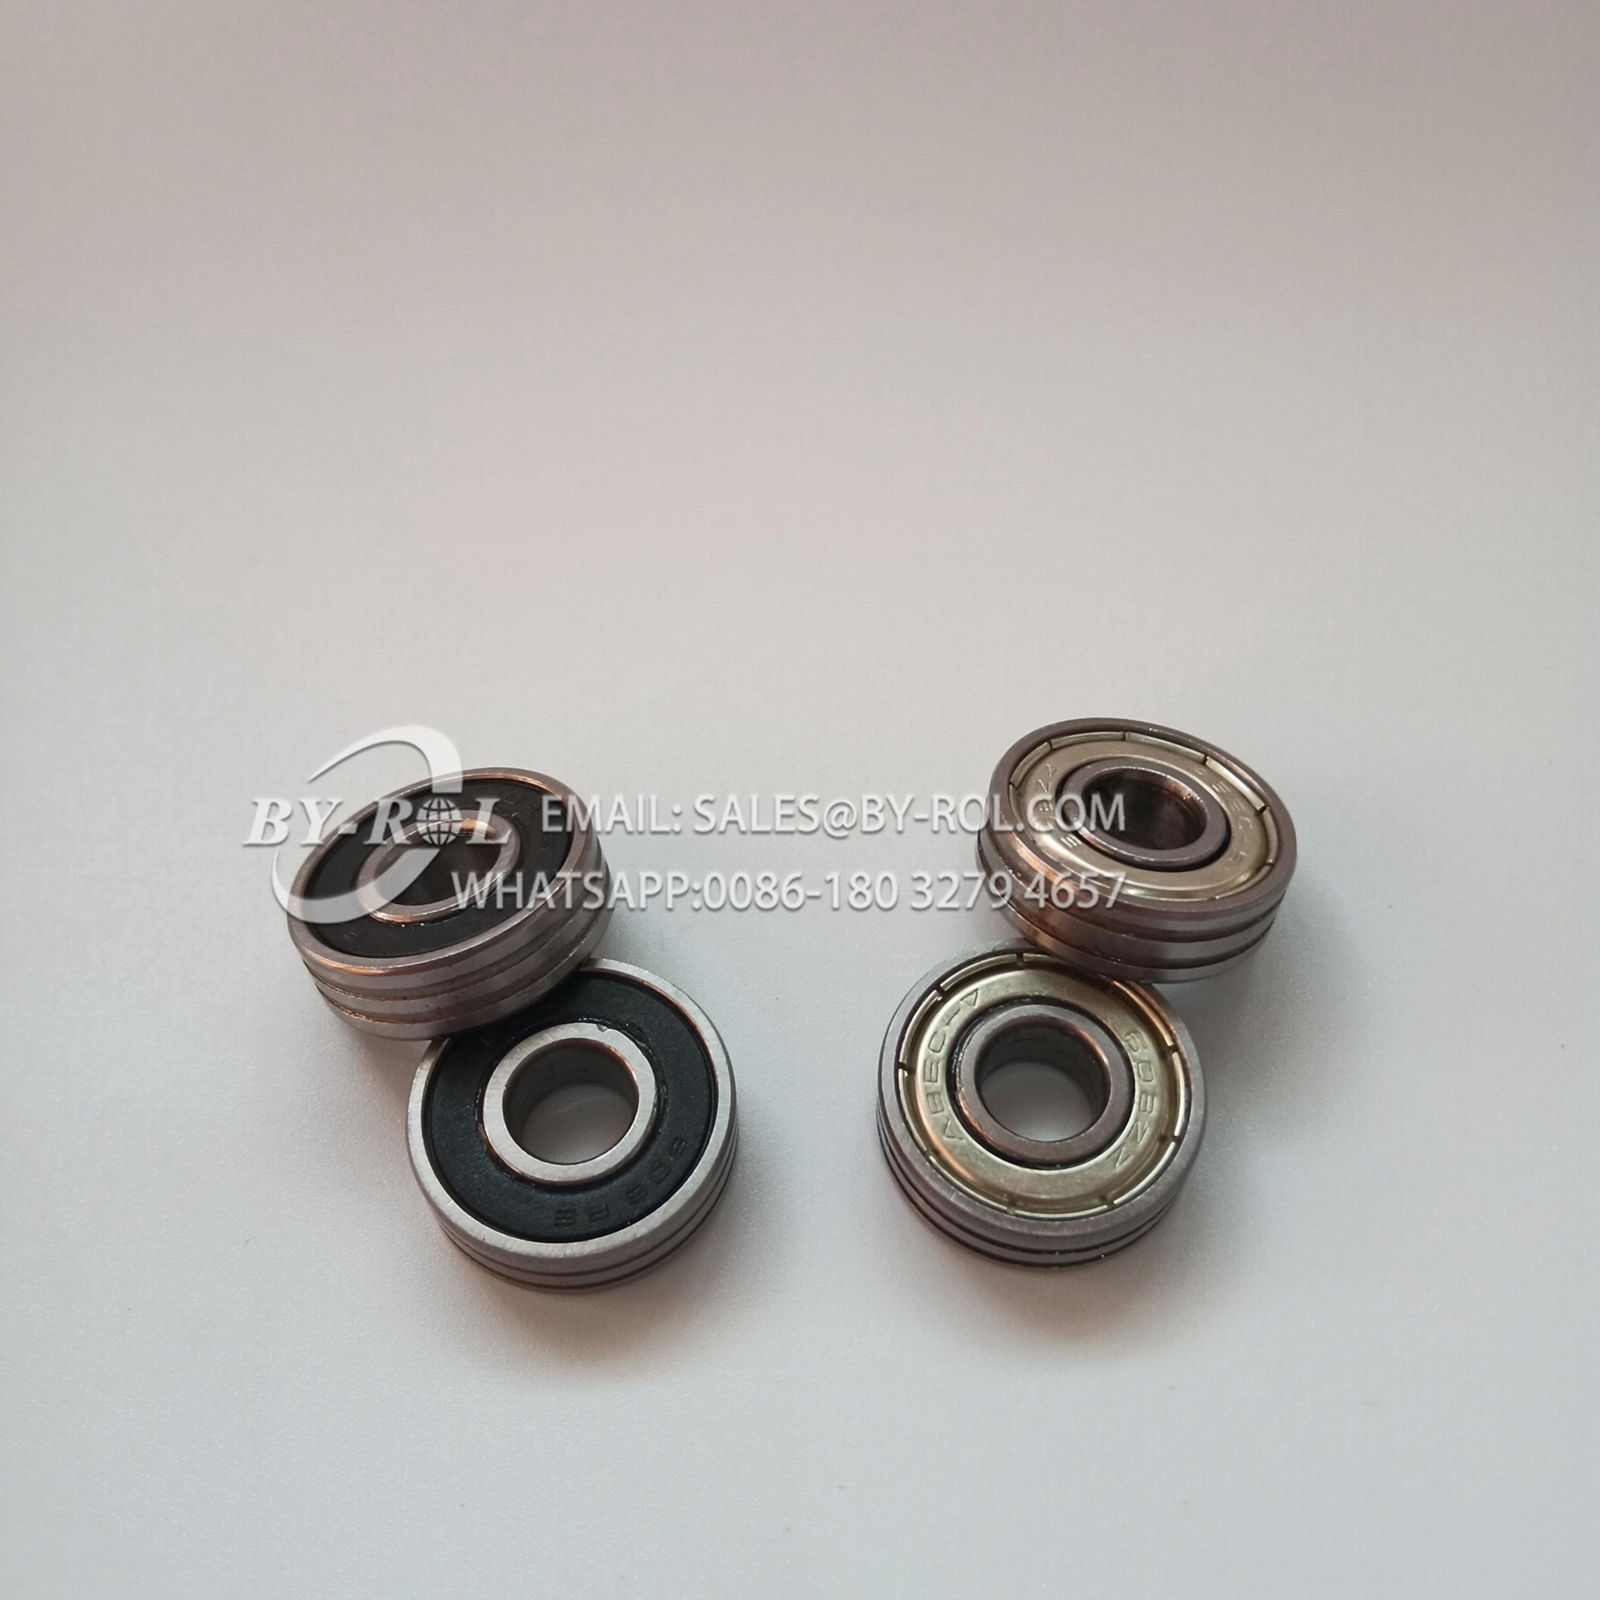 608 608RS 608ZZ 608-2RS 608ZZN 608-2RSN Door Window Rollers Ball Bearing Slotted